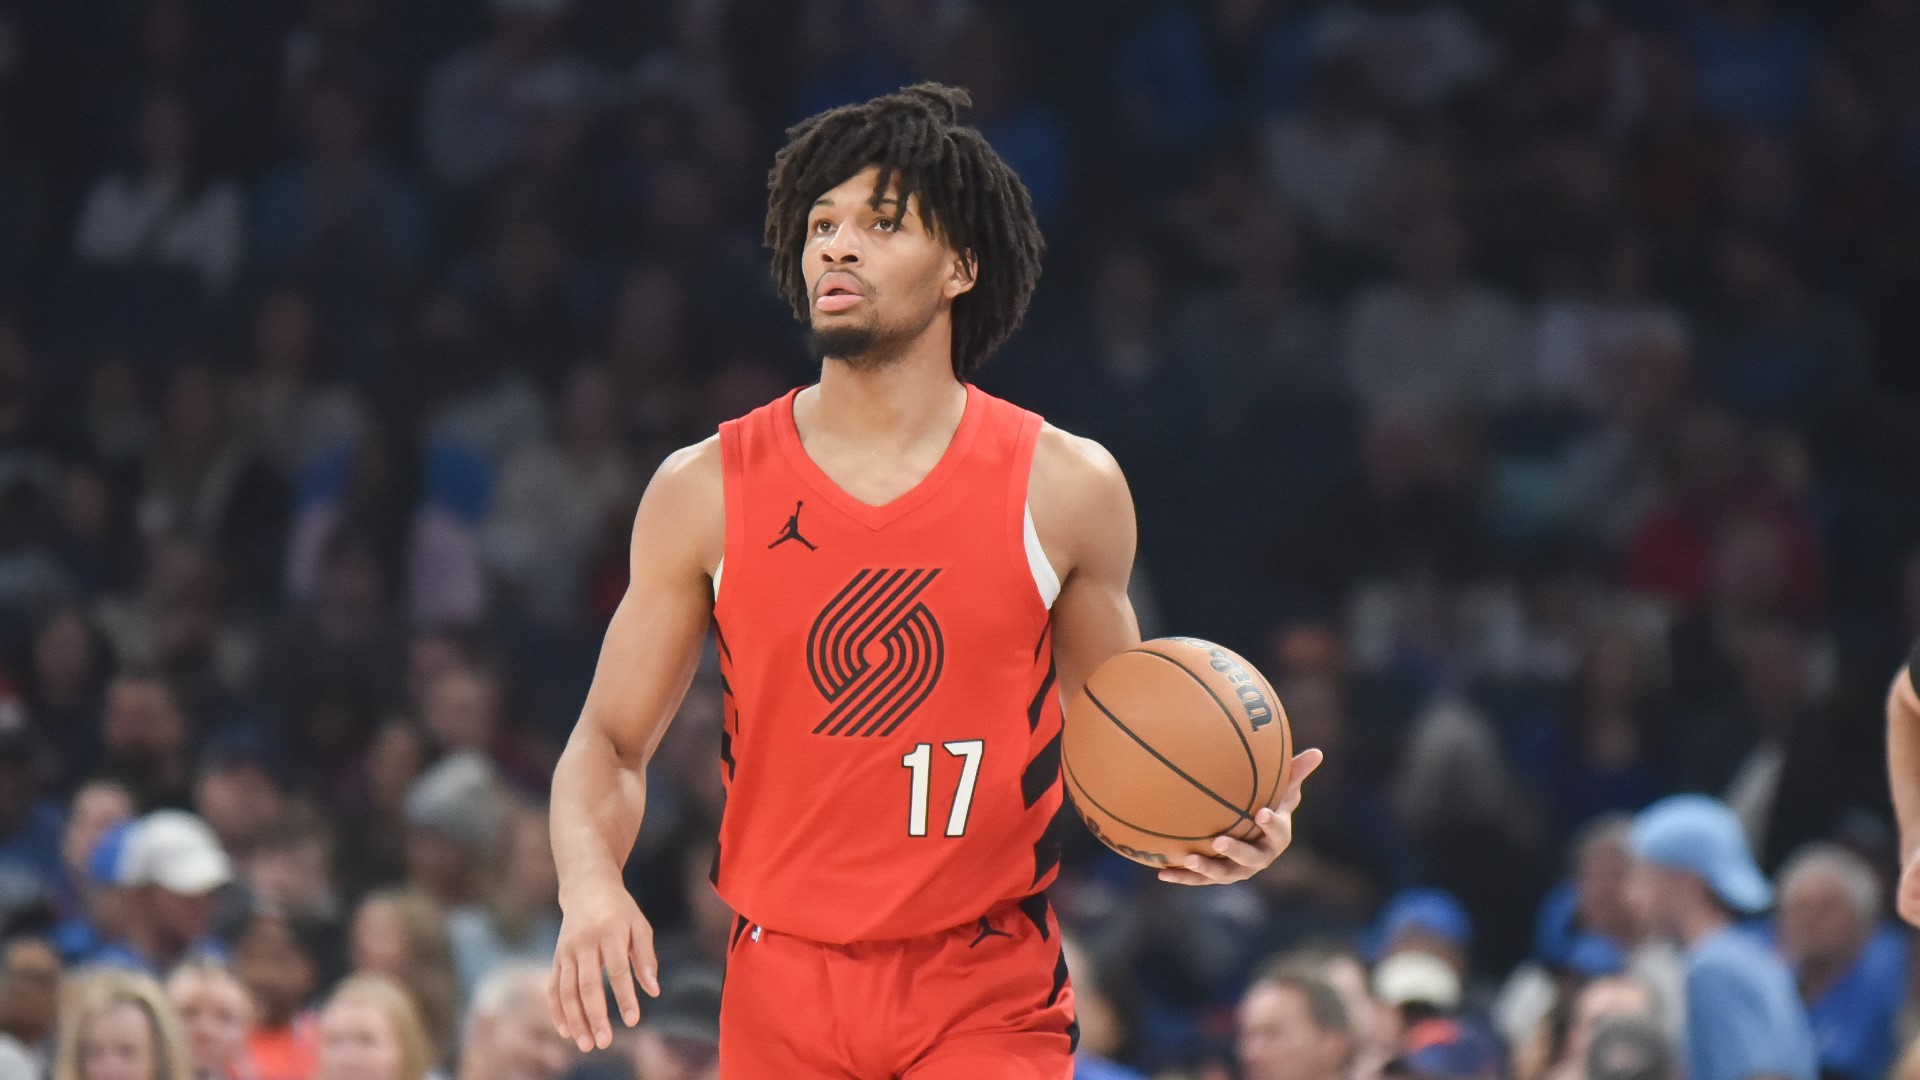 Portland Trail Blazers second-year guard Shaedon Sharpe discusses his second season in the NBA, his plans for the offseason and looks ahead to next season.